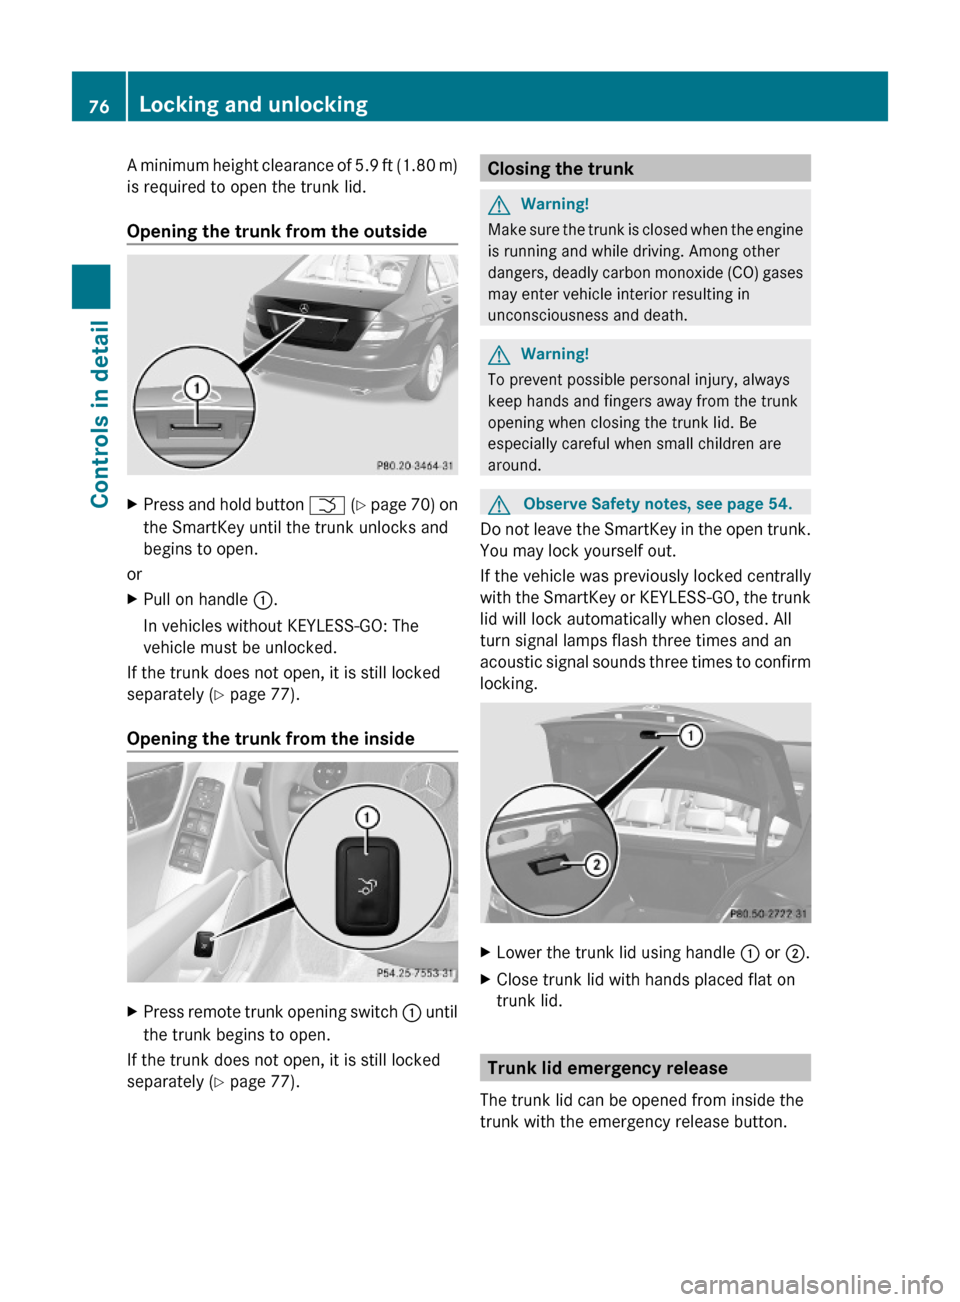 MERCEDES-BENZ C350S 2010 W204 Owners Manual A minimum height clearance of 5.9 ft (1.80 m)
is required to open the trunk lid.
Opening the trunk from the outside
XPress and hold button F (Y page 70) on
the SmartKey until the trunk unlocks and
beg